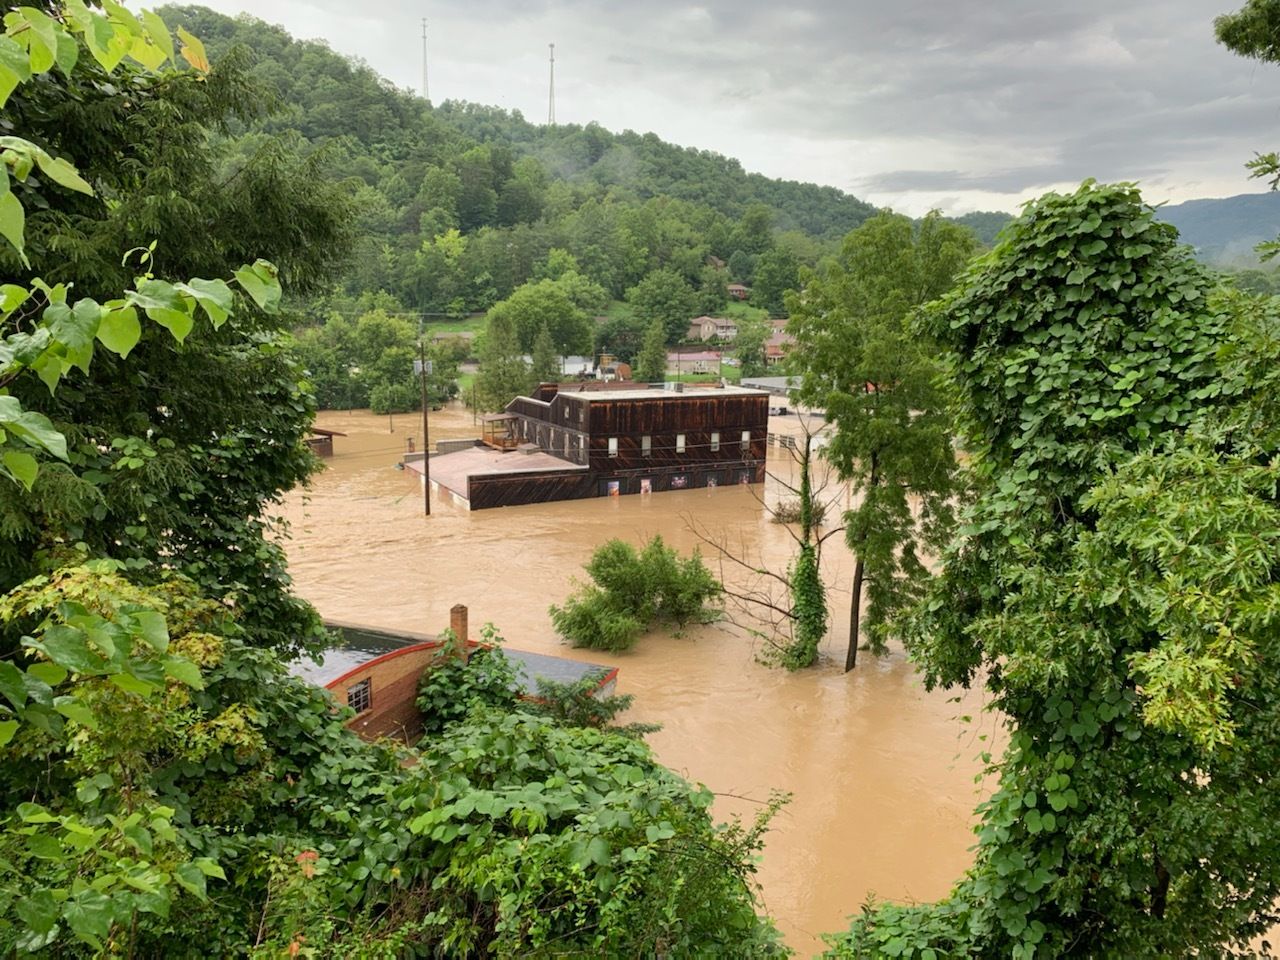 Appalshop, a beloved media, culture and community center in Whitesburg, Kentucky, is shown amid floods that swamped the eastern part of the state in late July.